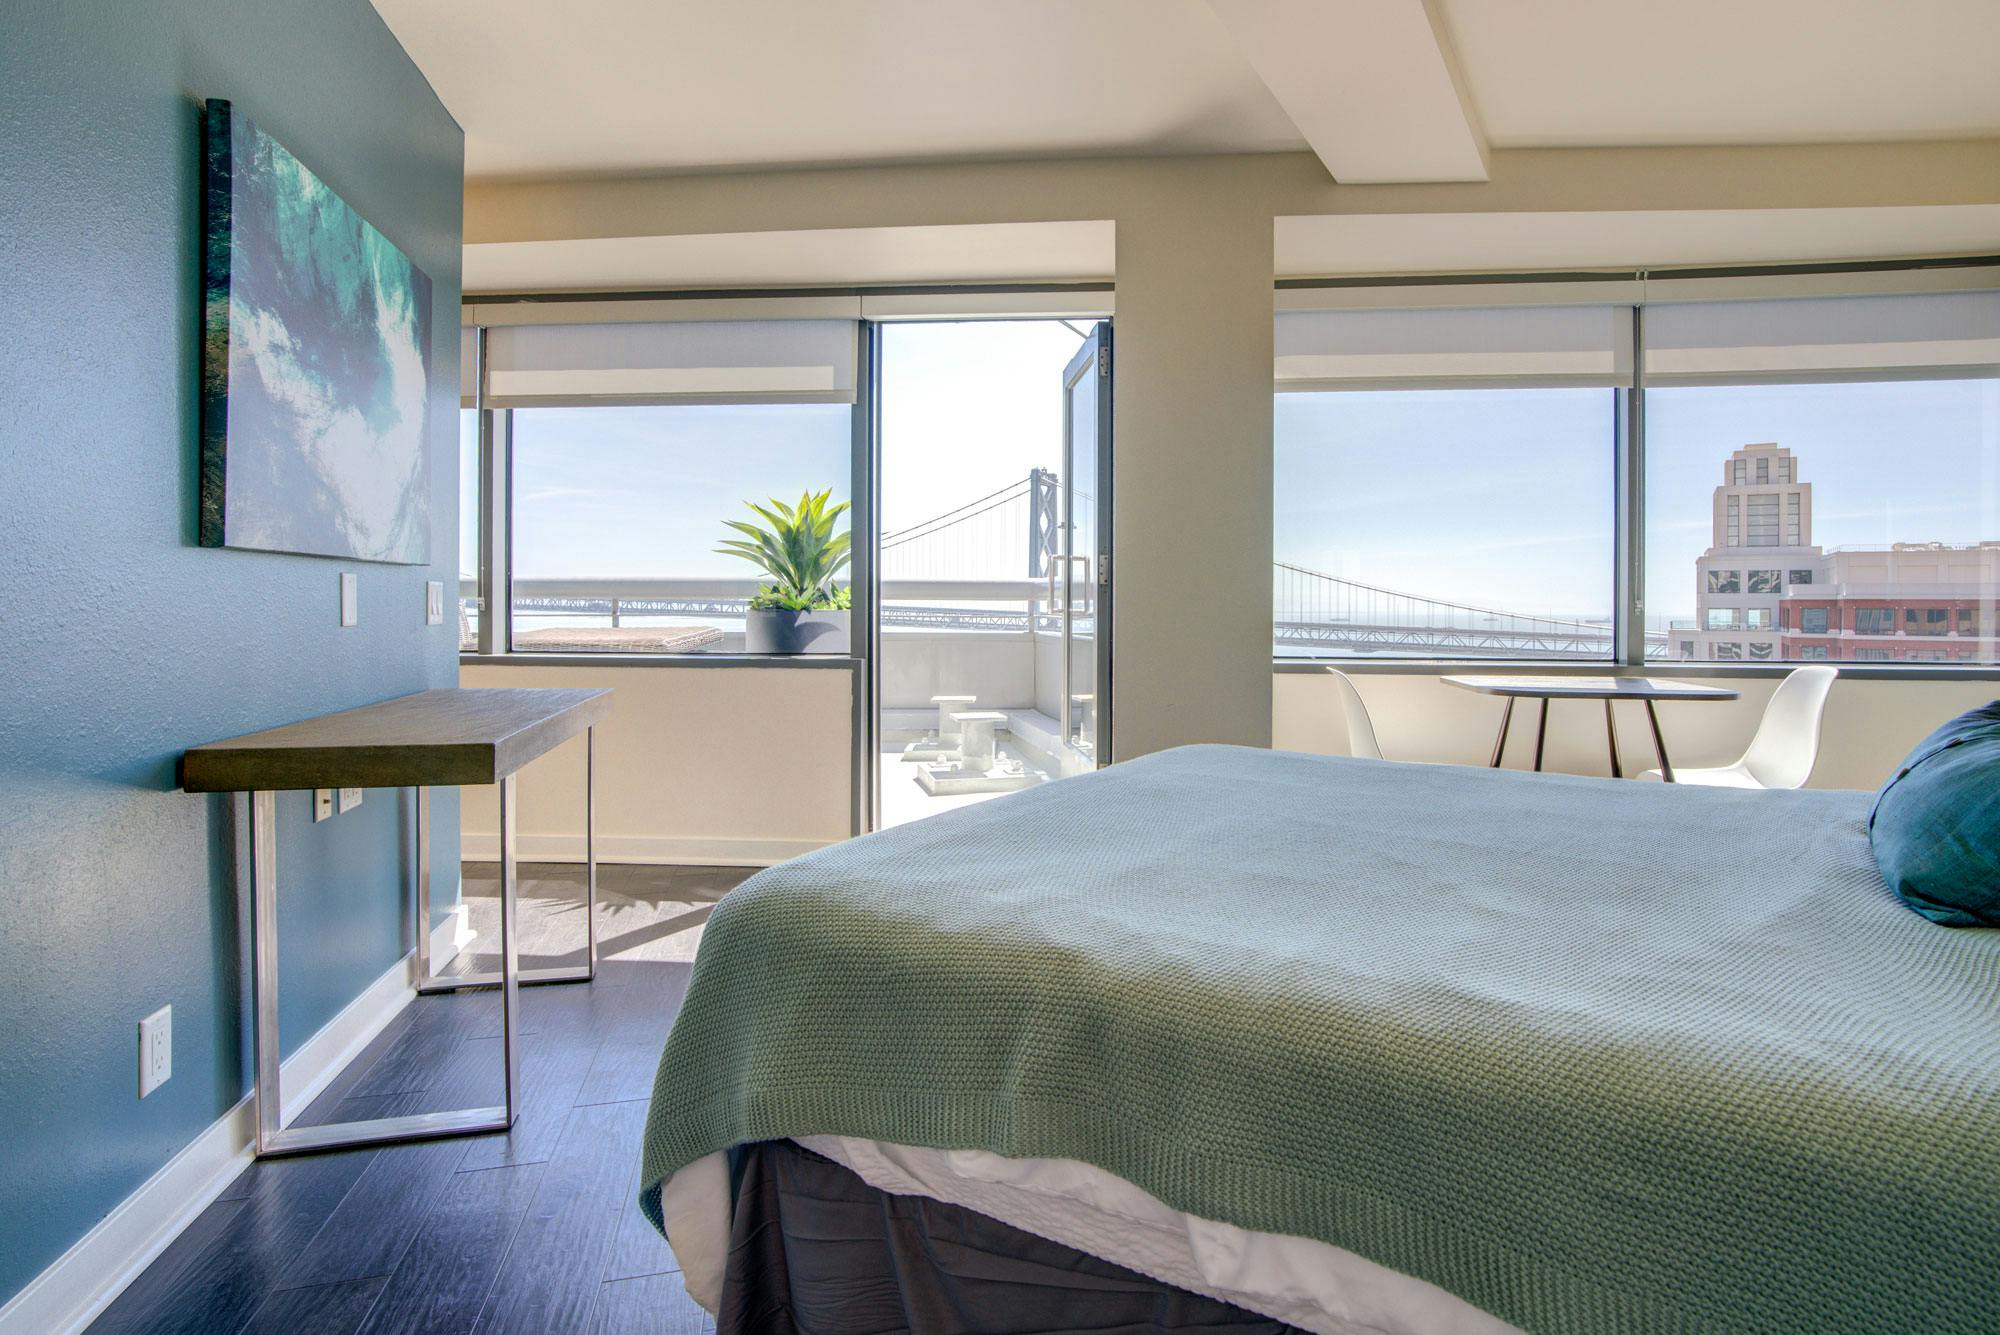 With access to a balcony and great views, the master bedroom in many units of One Rincon Hill are lavish, capacious, and stylish. 